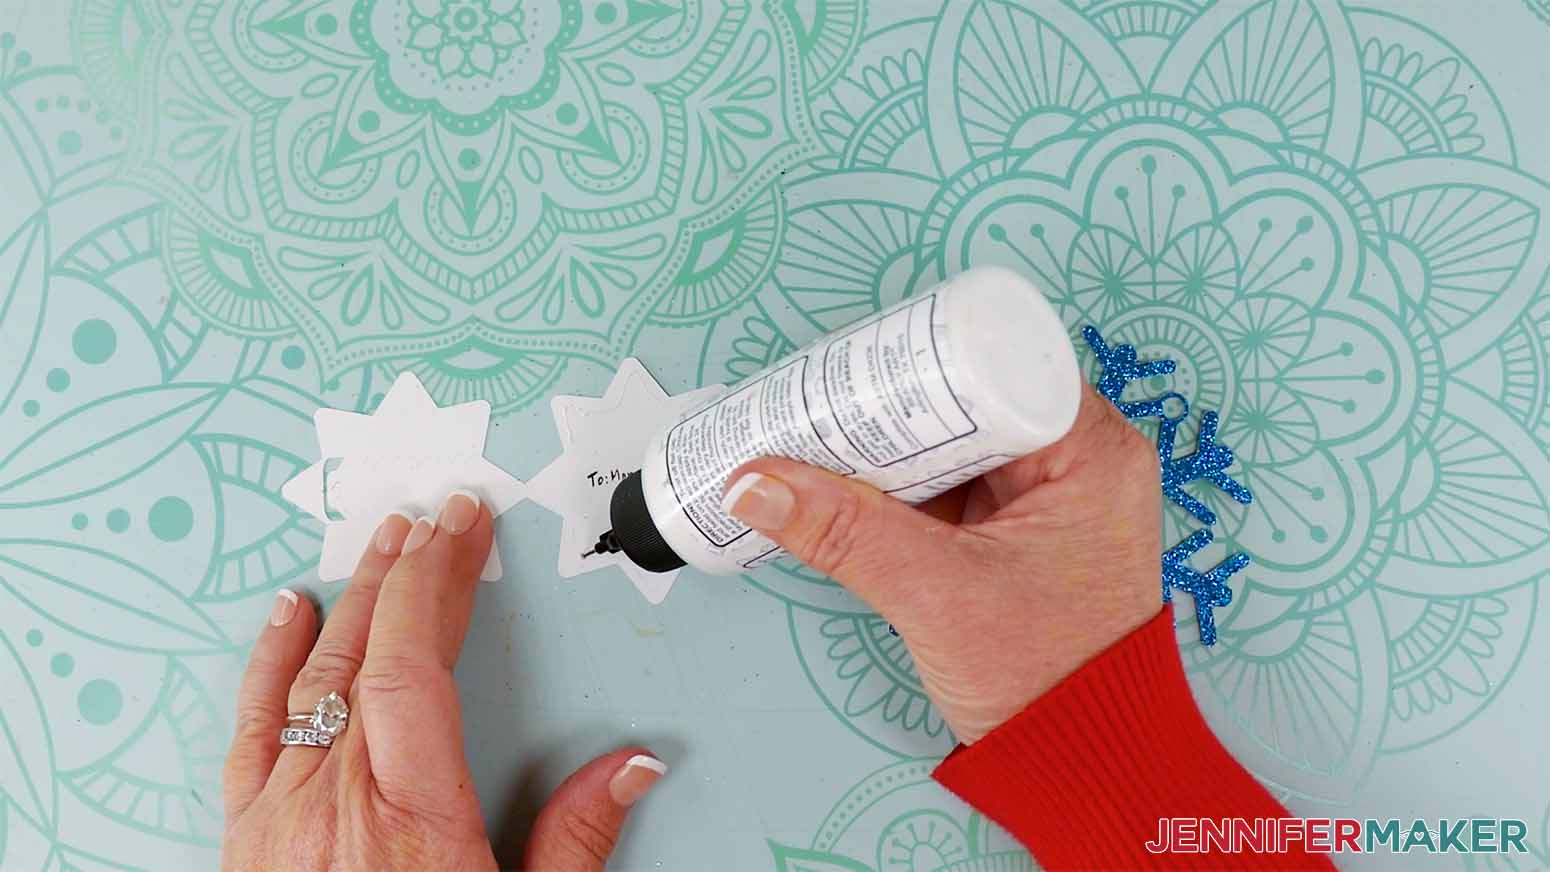 Apply a thin line of craft glue around the insde edges of the snowflake gift tag center.